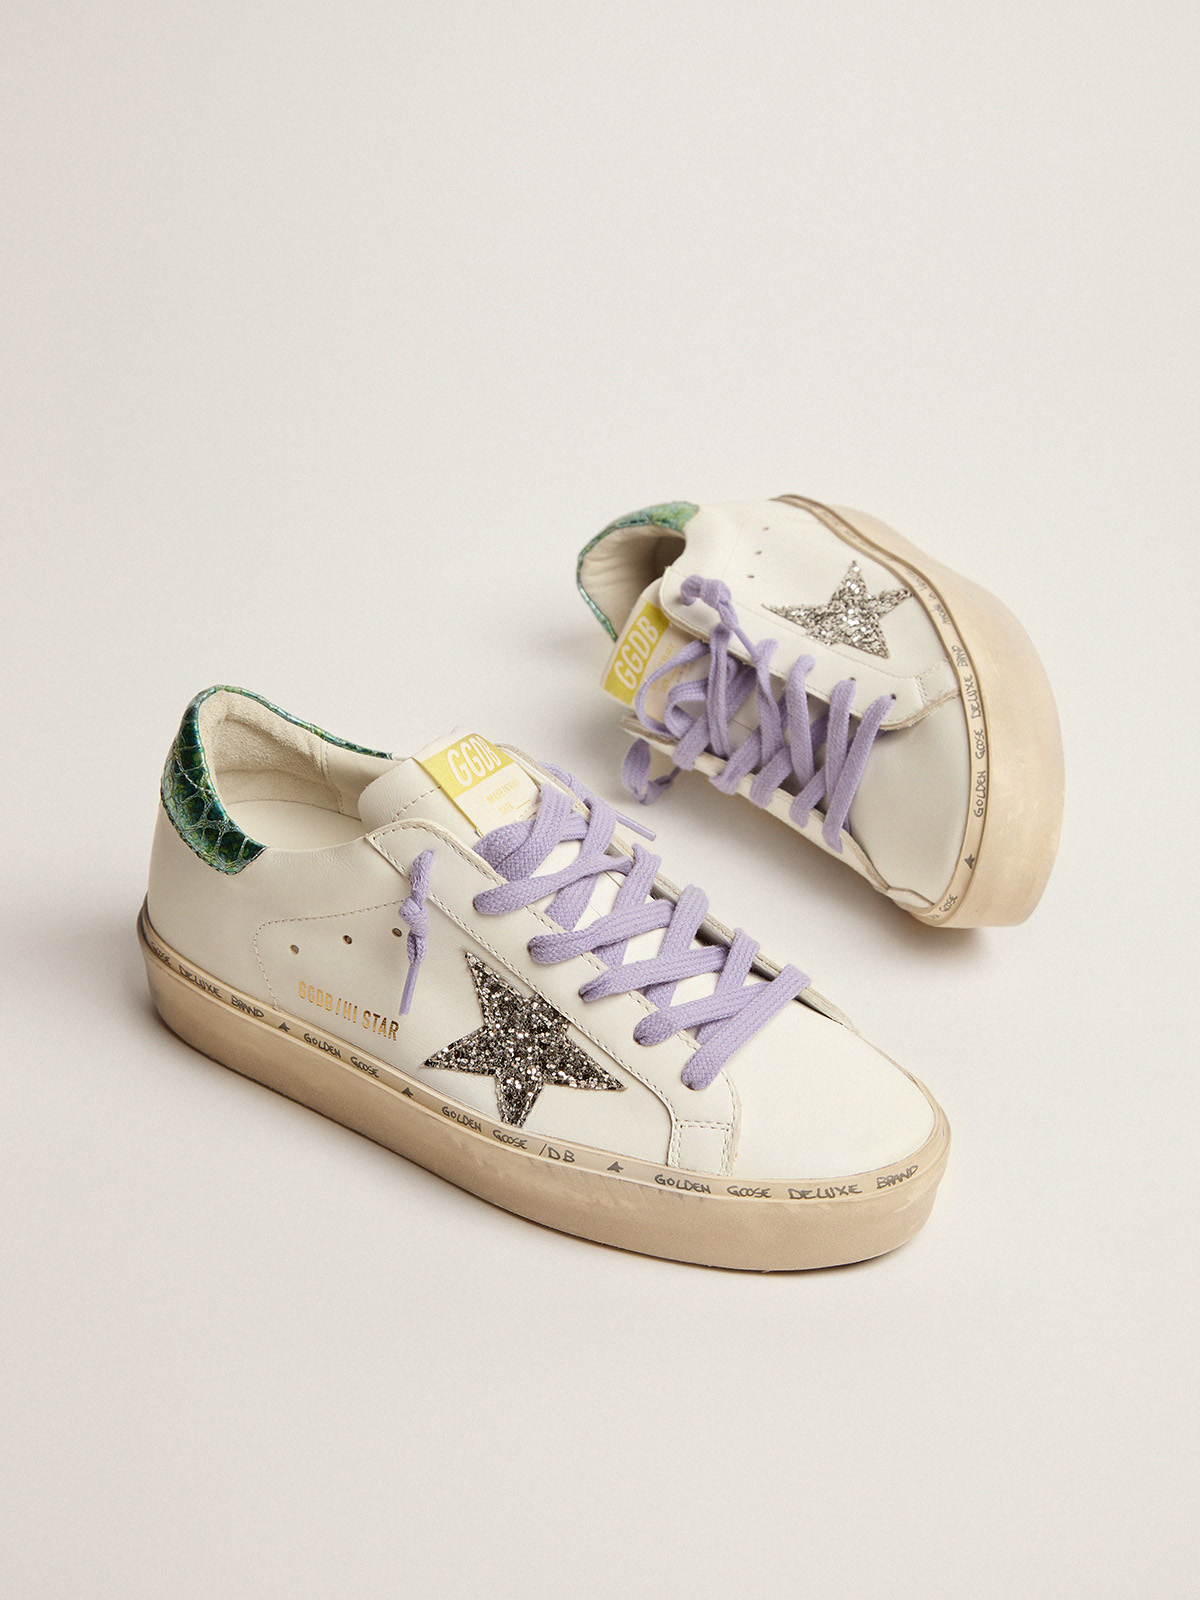 Hi Star LTD sneakers with glitter star and printed heel tab | Golden Goose